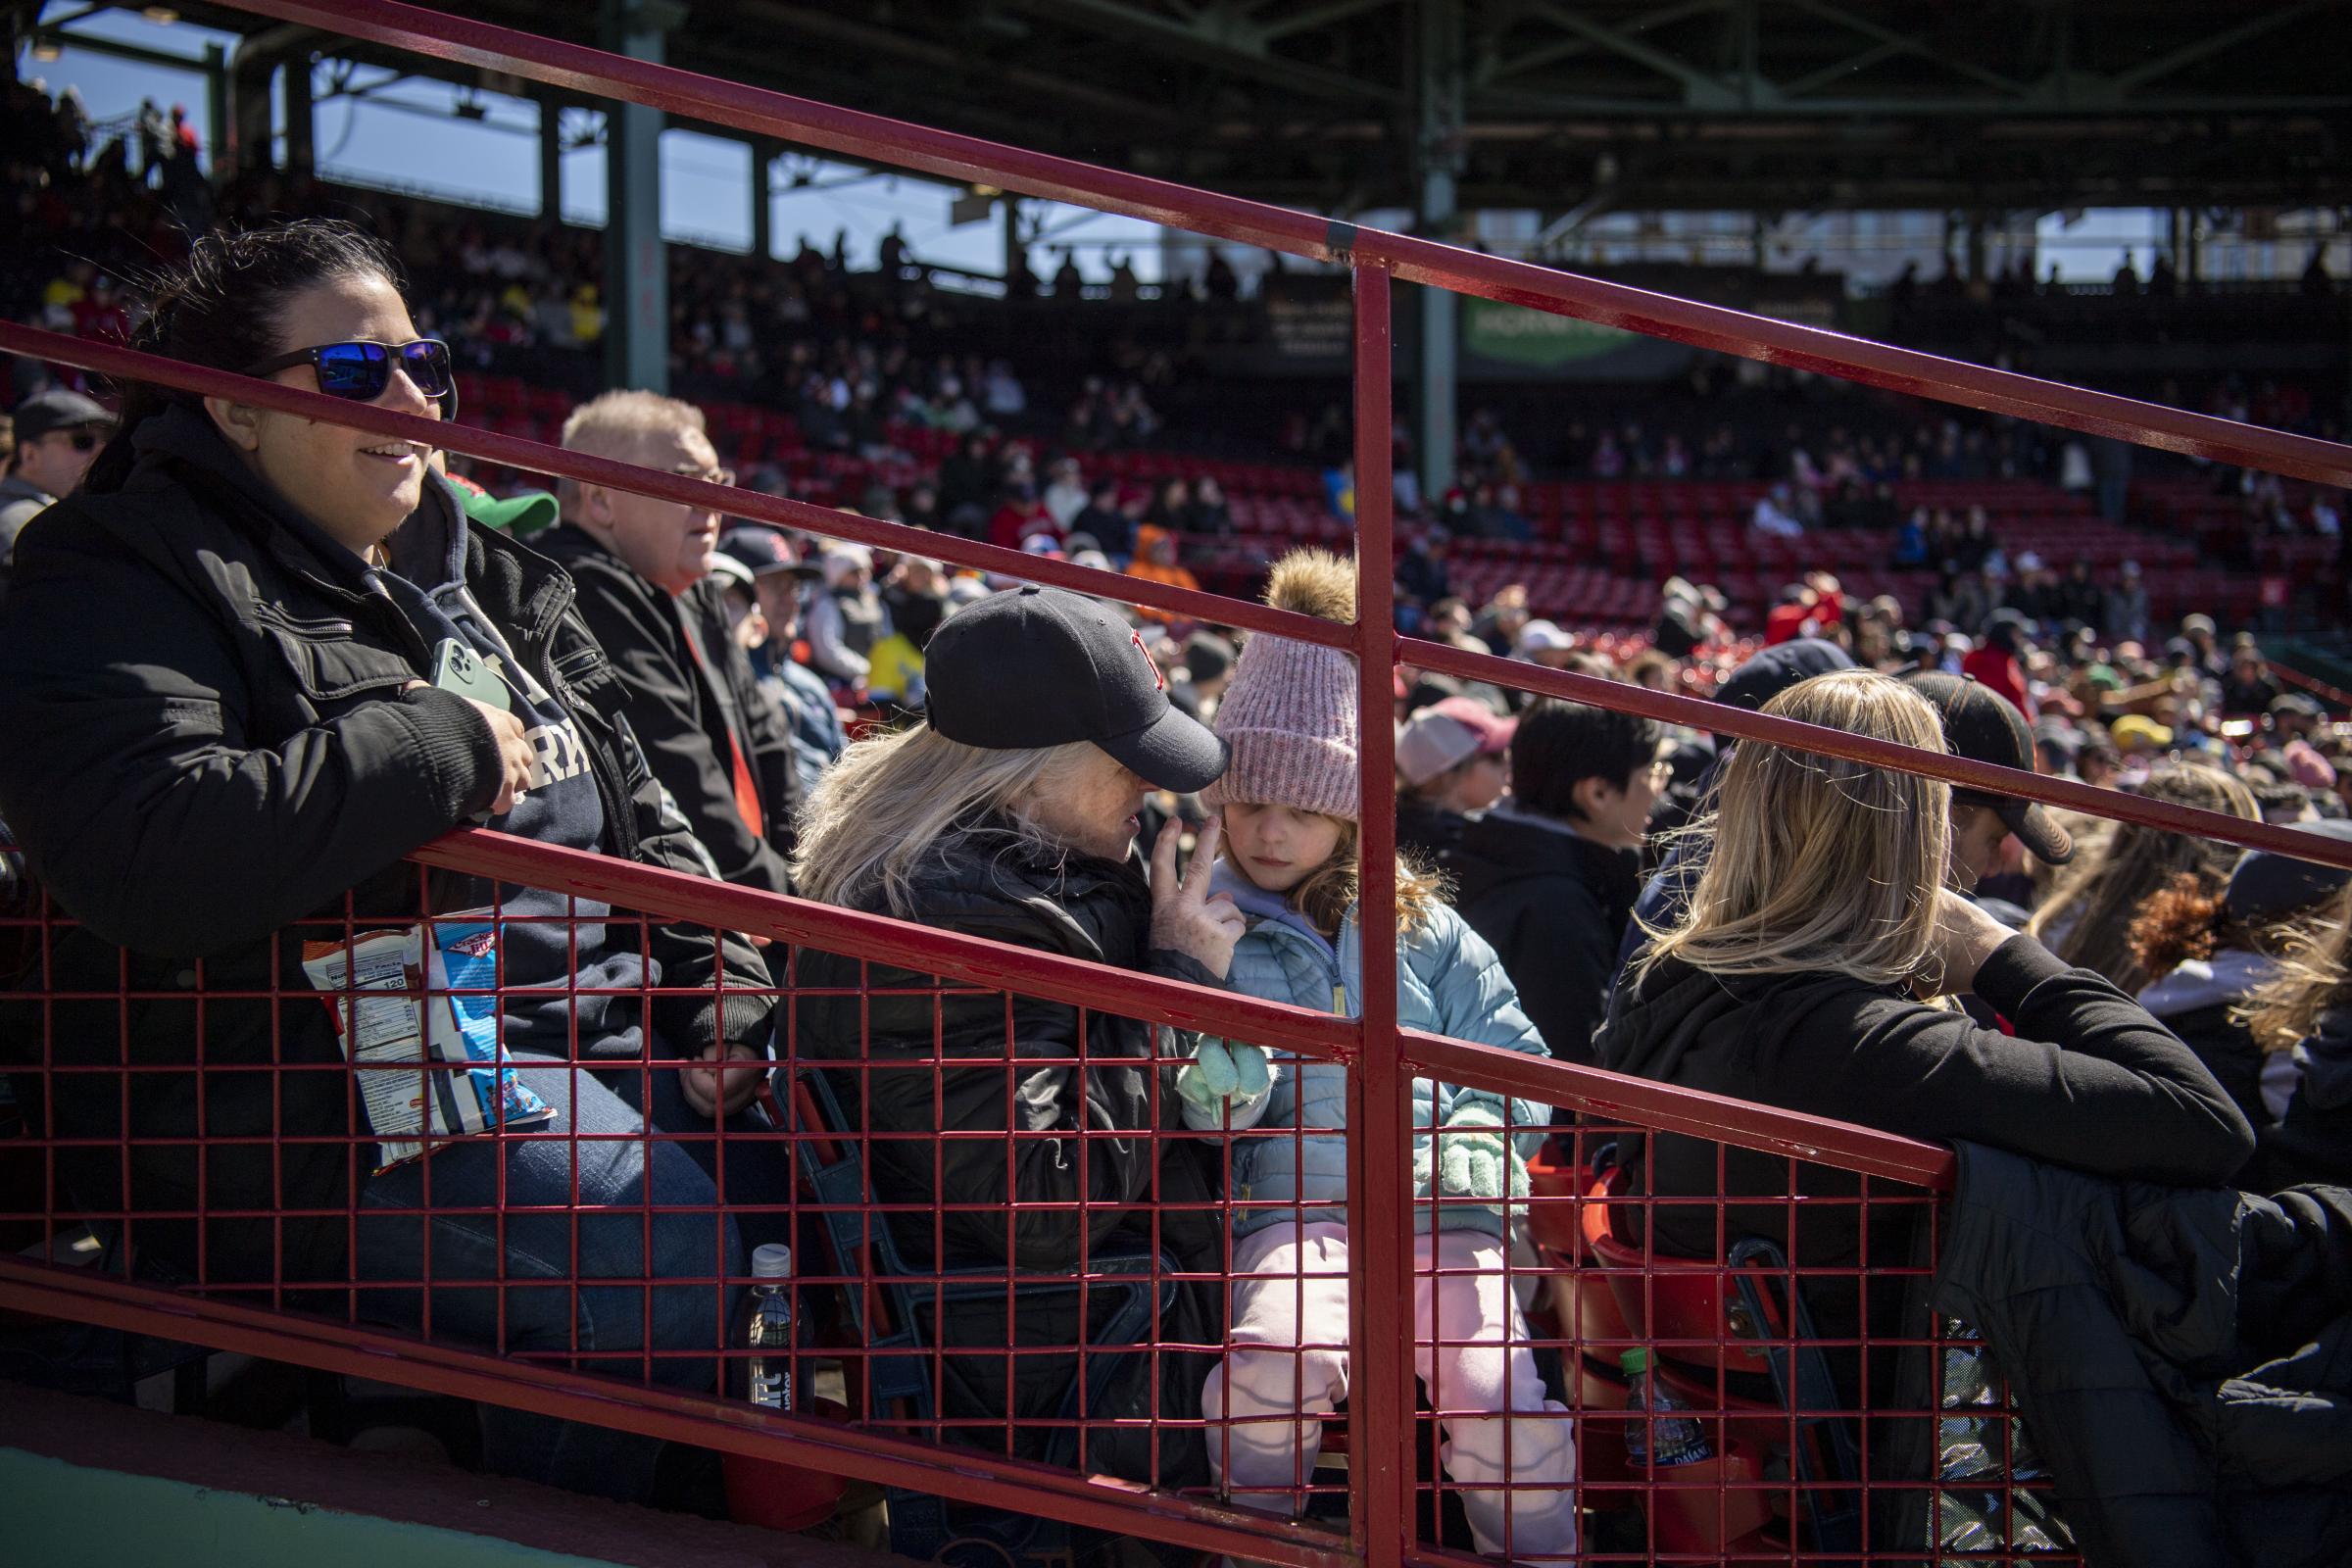 The 2023 Boston Red Sox  - April 2, 2023, Boston, MA: Fans watch the game at Fenway...